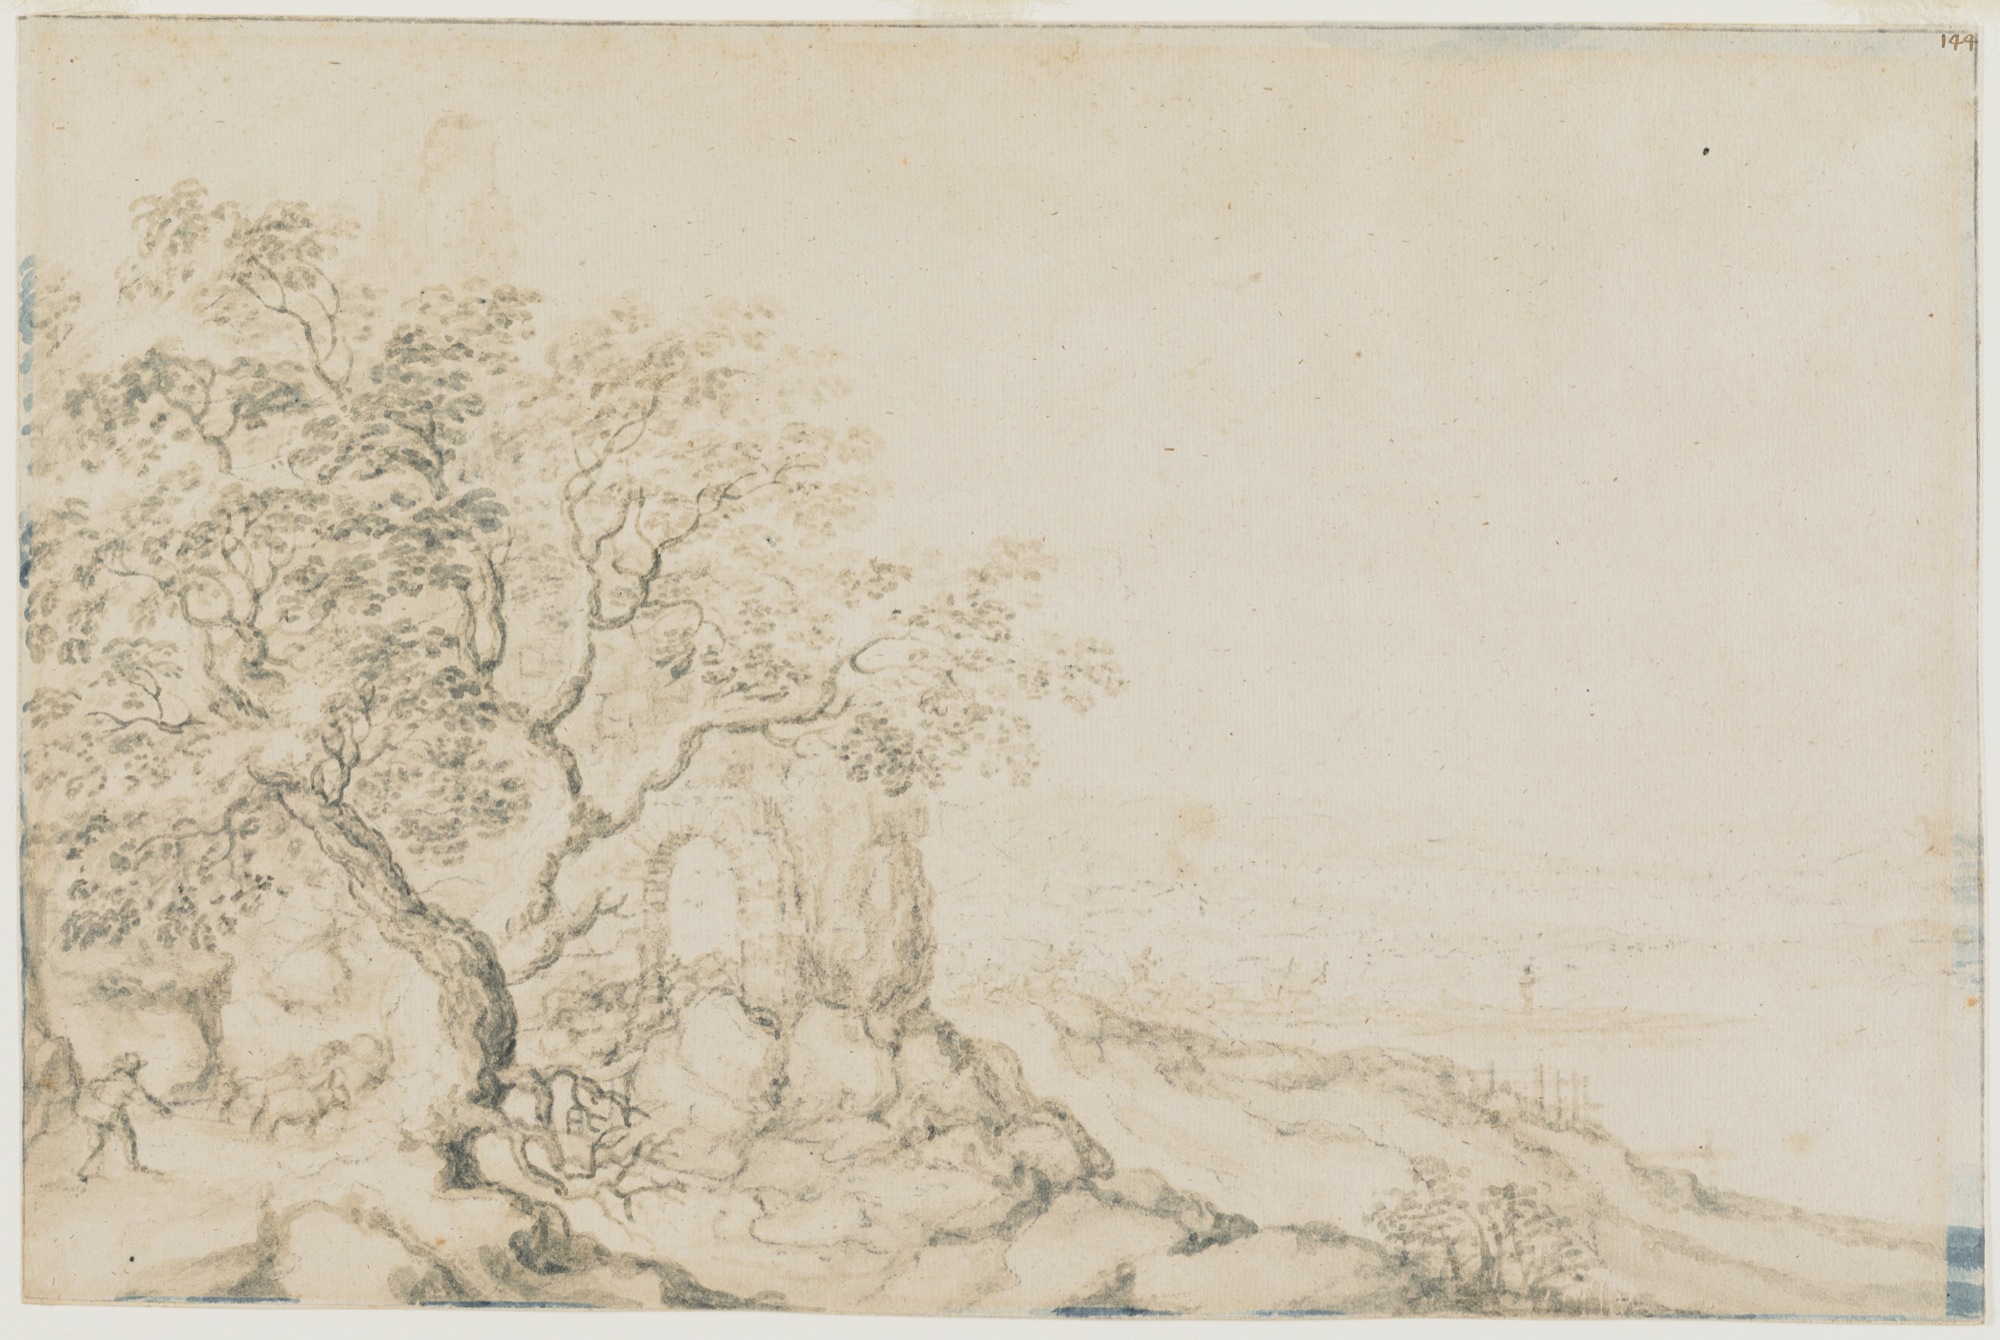 Landscape with River Artist: Isaac Major | James Bowdoin III and ...